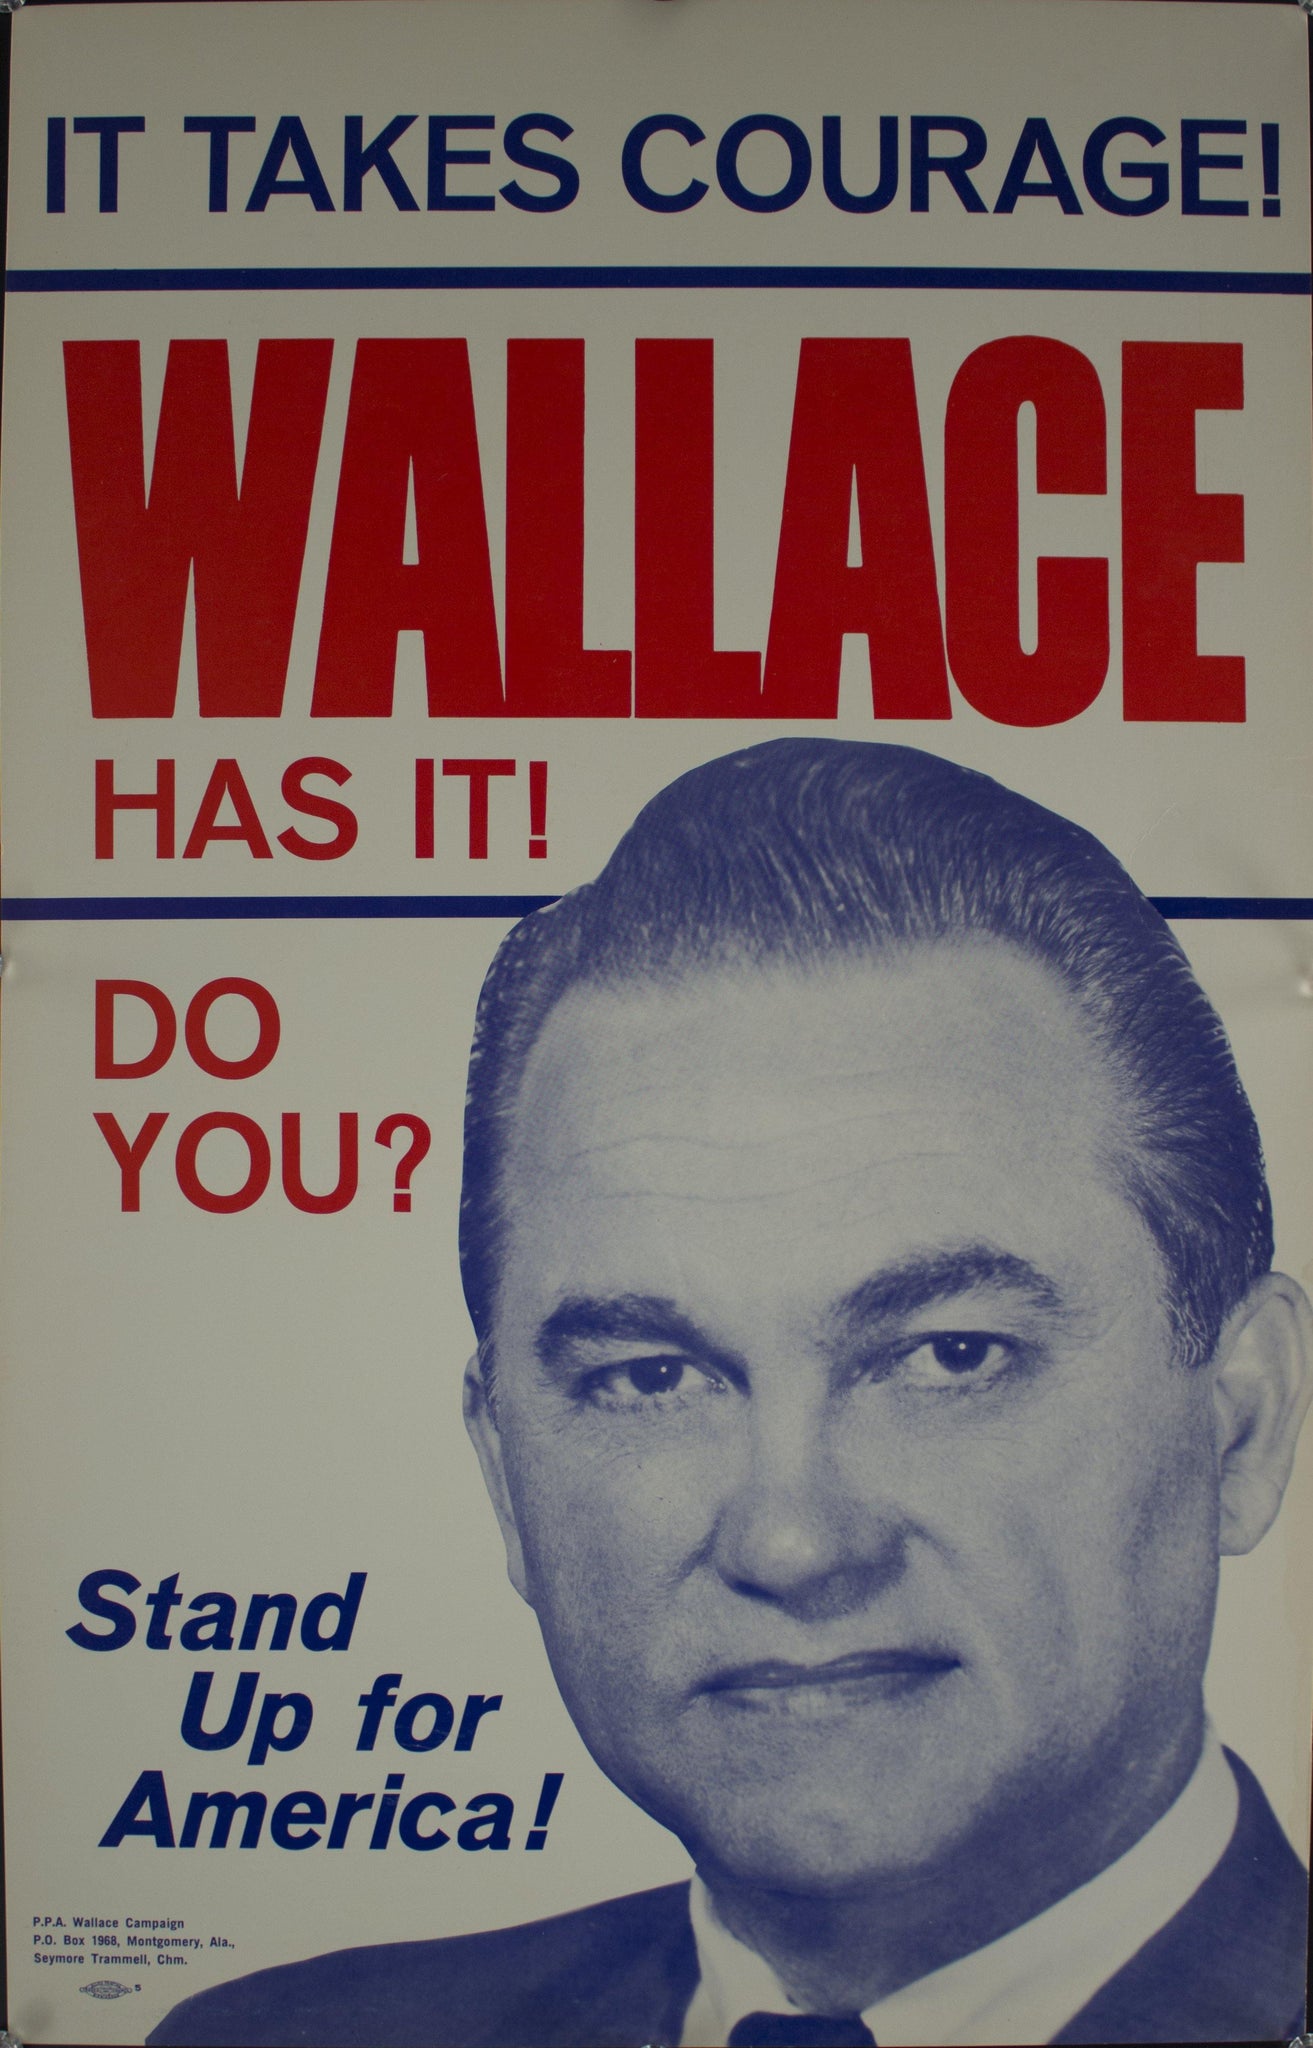 1968 It Takes Courage! | Wallace Has It! | Do you? | Stand Up for America! - Golden Age Posters